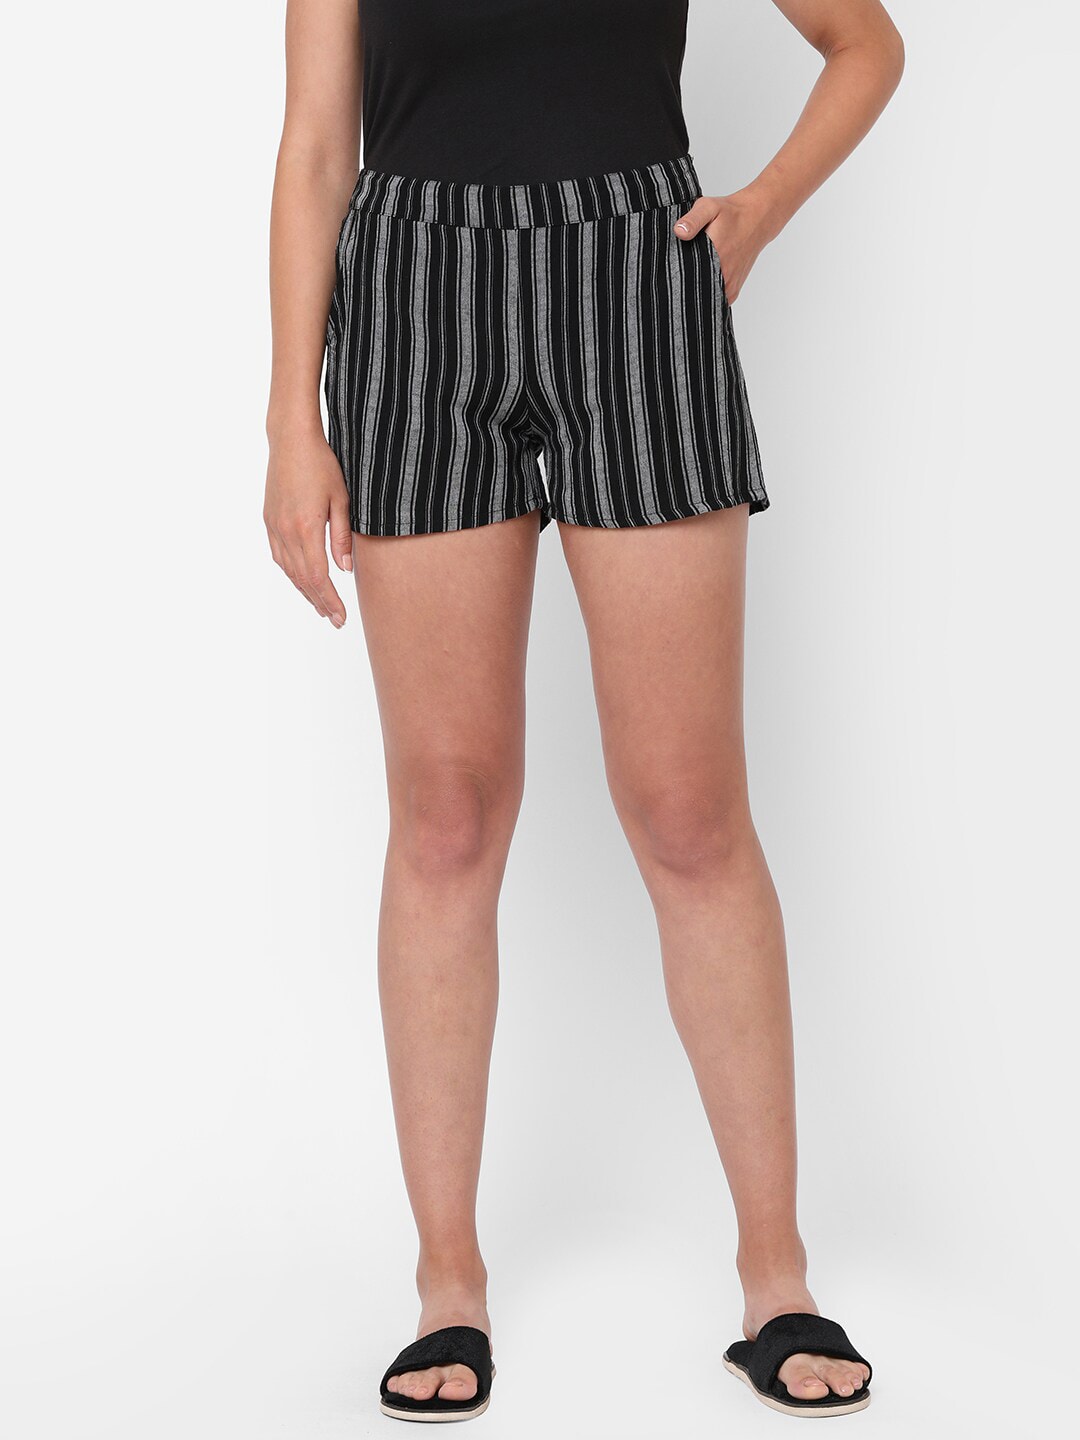 Mystere Paris Women Black & Grey Striped Lounge Shorts Price in India